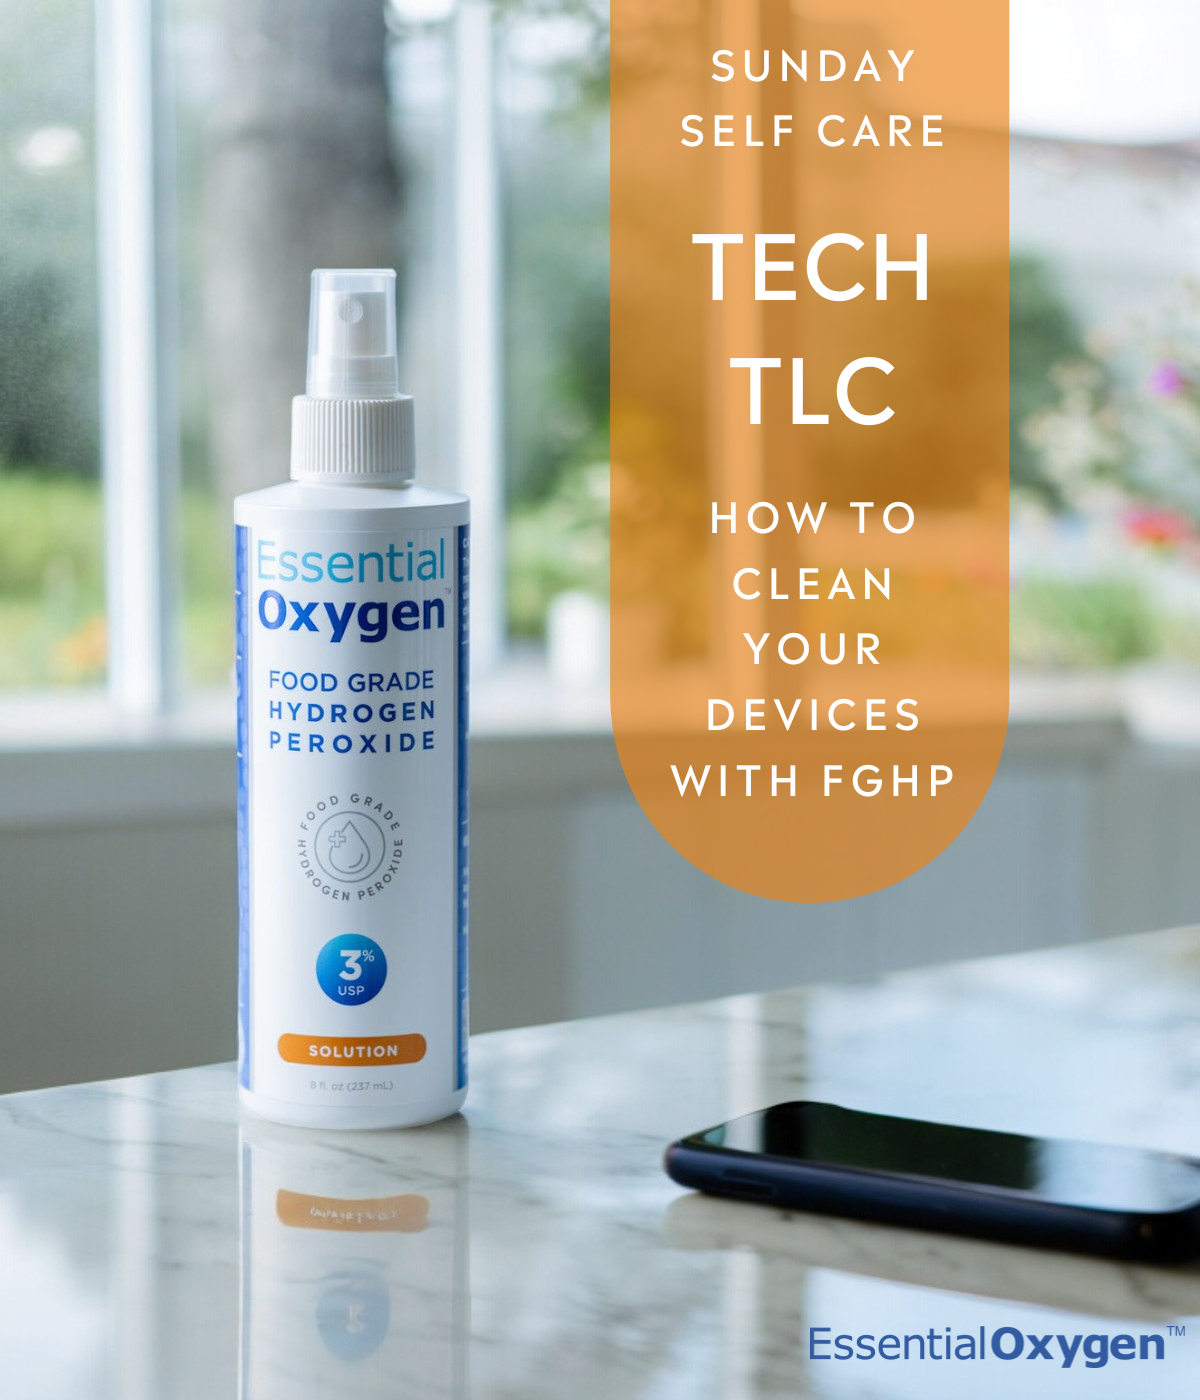 TECH TLC | How To Clean Your Electronics With Essential Oxygen Food Grade Hydrogen Peroxide; Food grade hydrogen peroxide spray bottle on desk next to clean phone electronic device